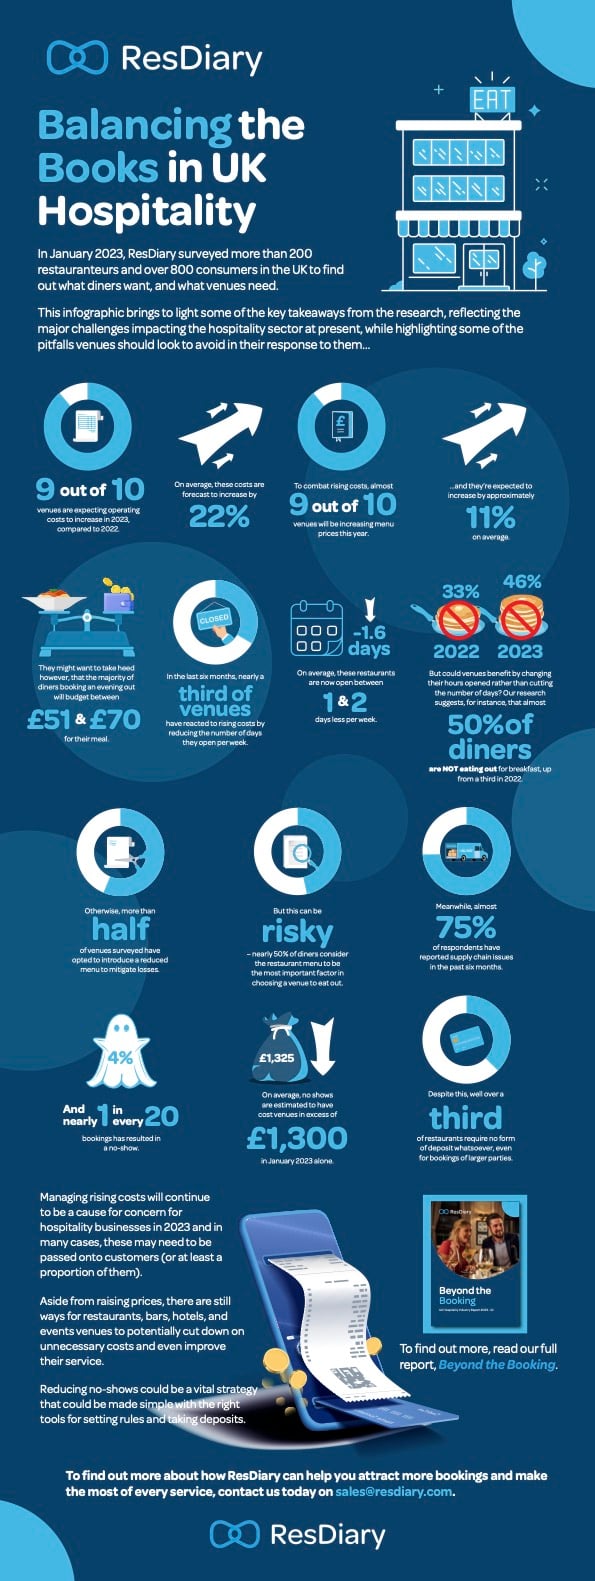 ResDiary - Beyond the Booking UK Hospitality Industry Report 2023 - Q1 - Infographic